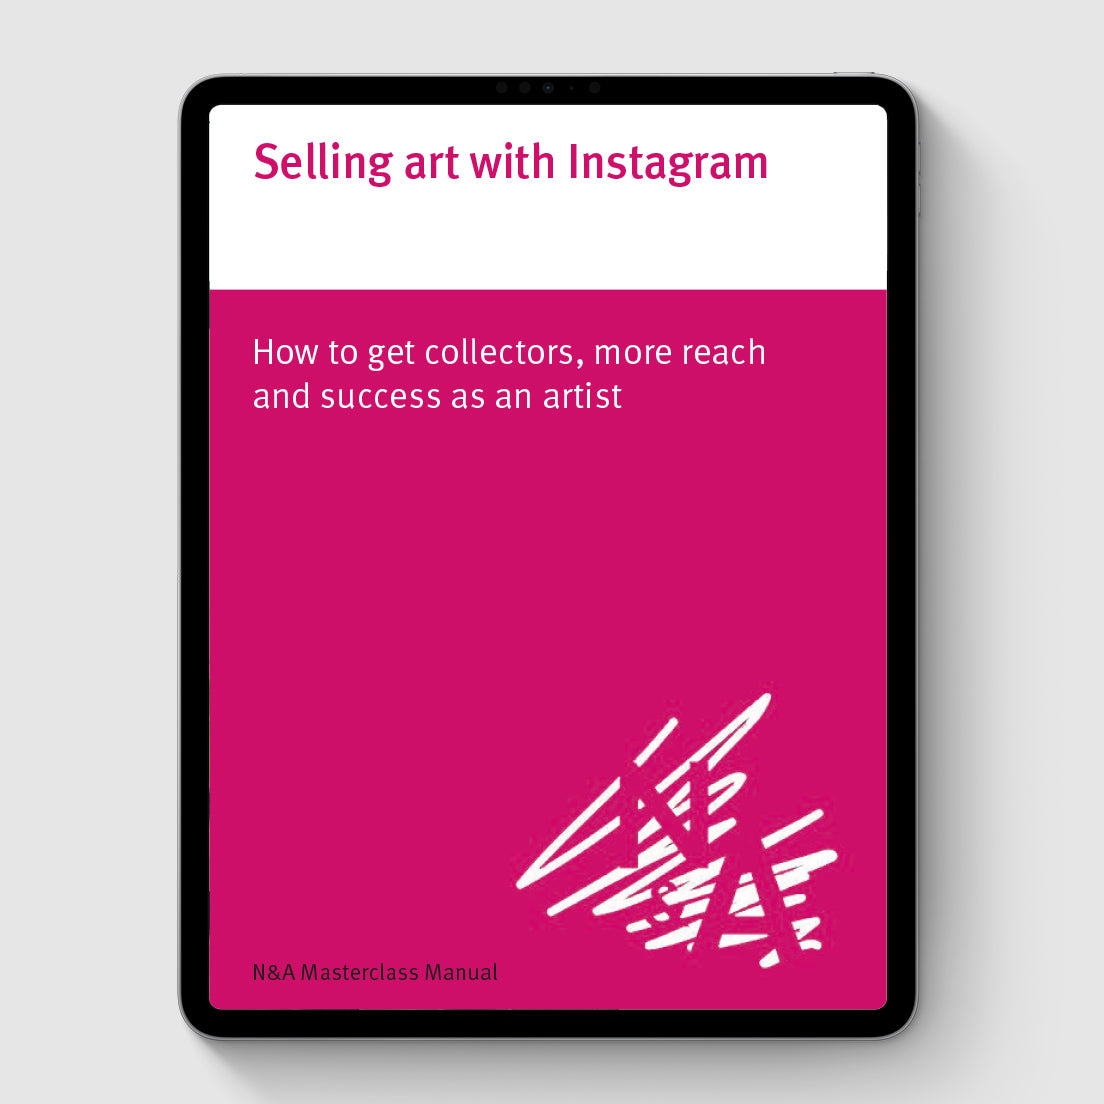 Selling art with Instagram